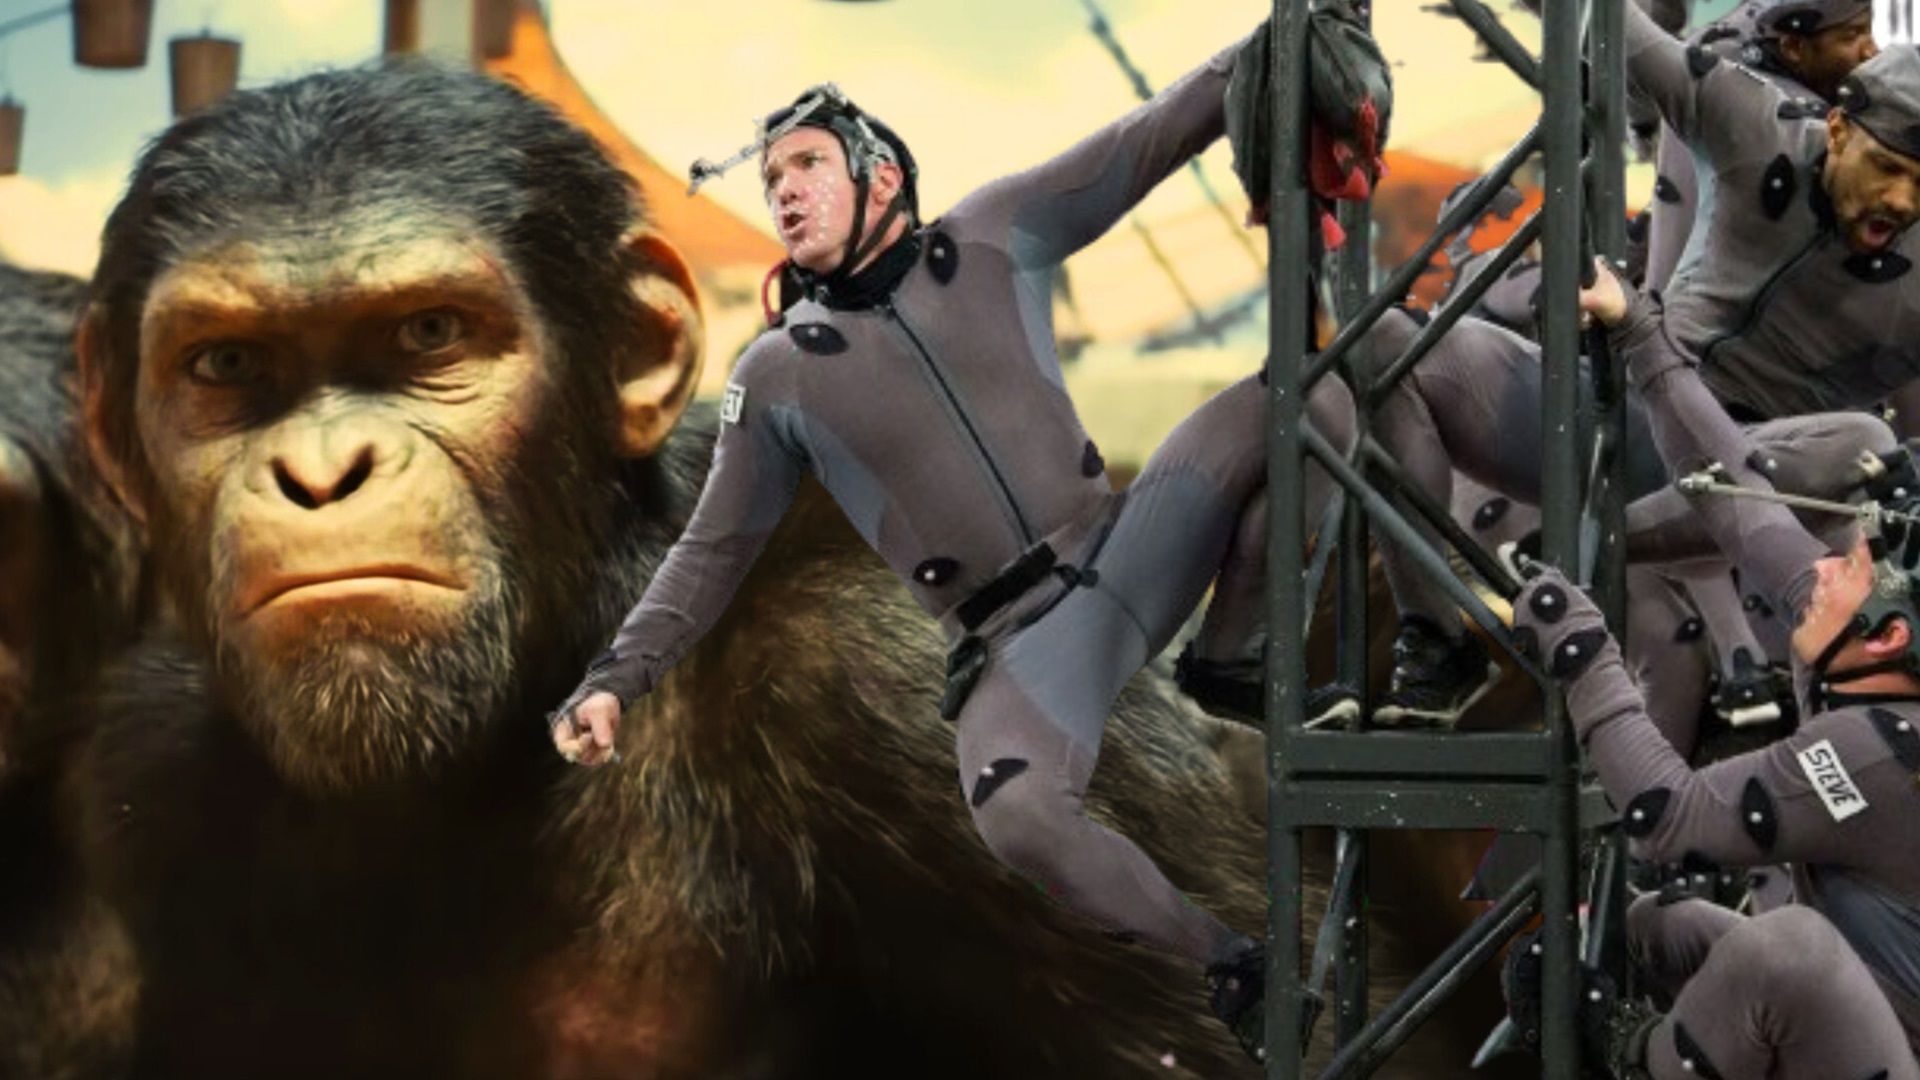 Still from Kingdom of the Planet of the Apes & actors in mo-cap suits.